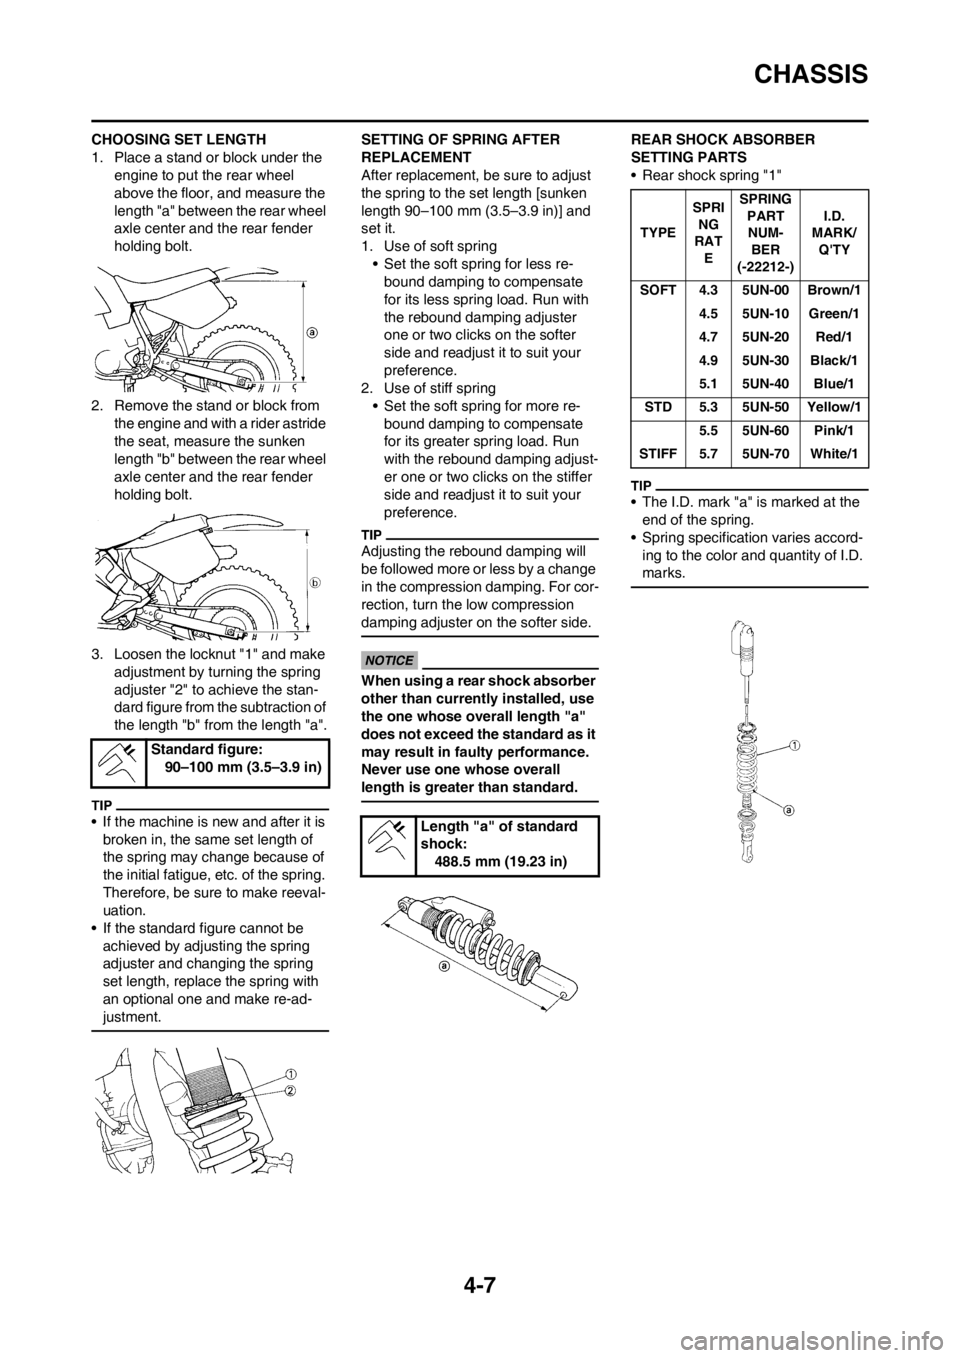 YAMAHA WR 250F 2013  Owners Manual 4-7
CHASSIS
CHOOSING SET LENGTH
1. Place a stand or block under the 
engine to put the rear wheel 
above the floor, and measure the 
length "a" between the rear wheel 
axle center and the rear fender 